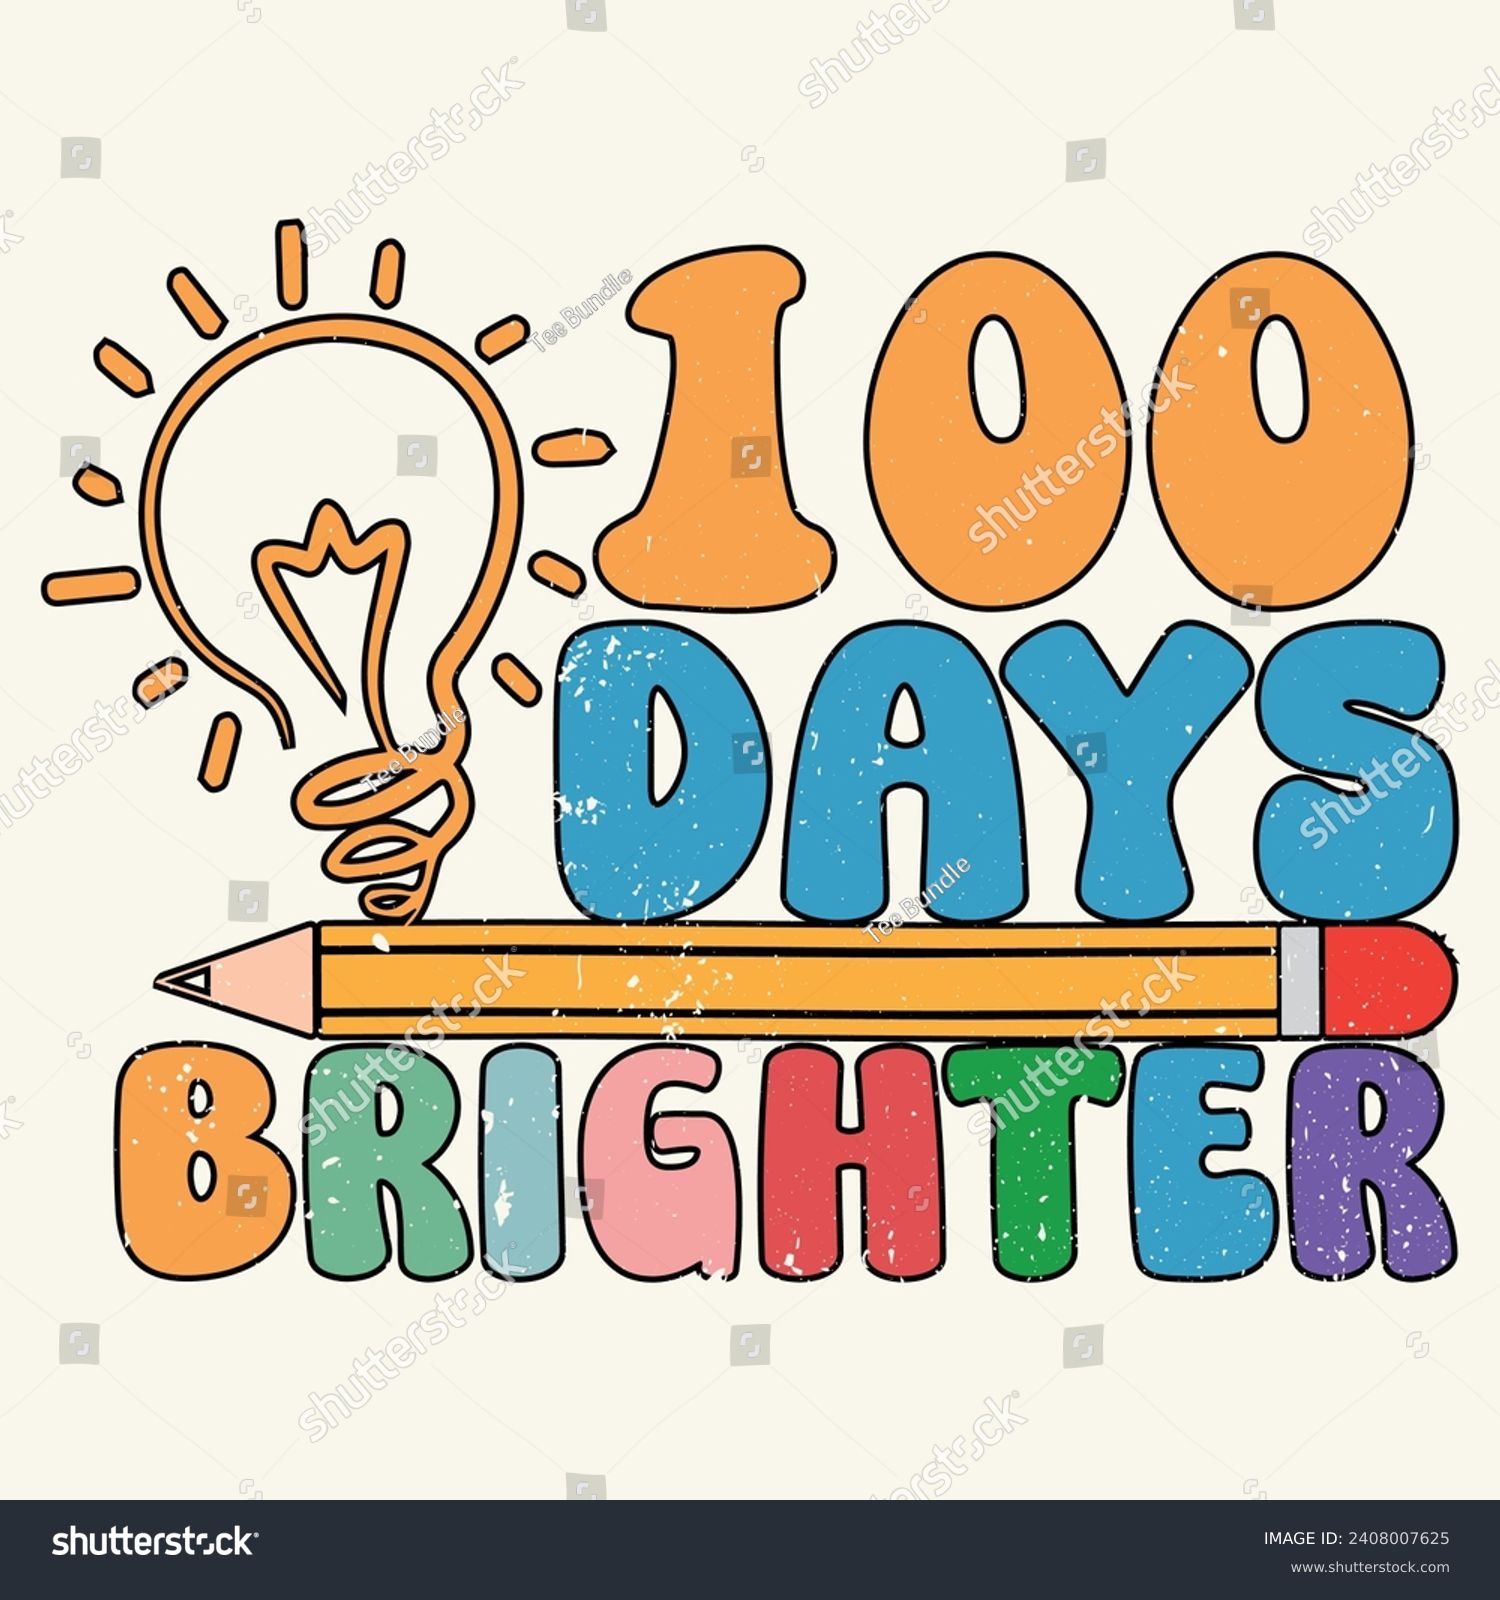 SVG of 100 Day's of brighter, Designs Bundle, Streetwear T-shirt Designs Artwork Set, Graffiti Vector Collection for Apparel and Clothing Print.. svg